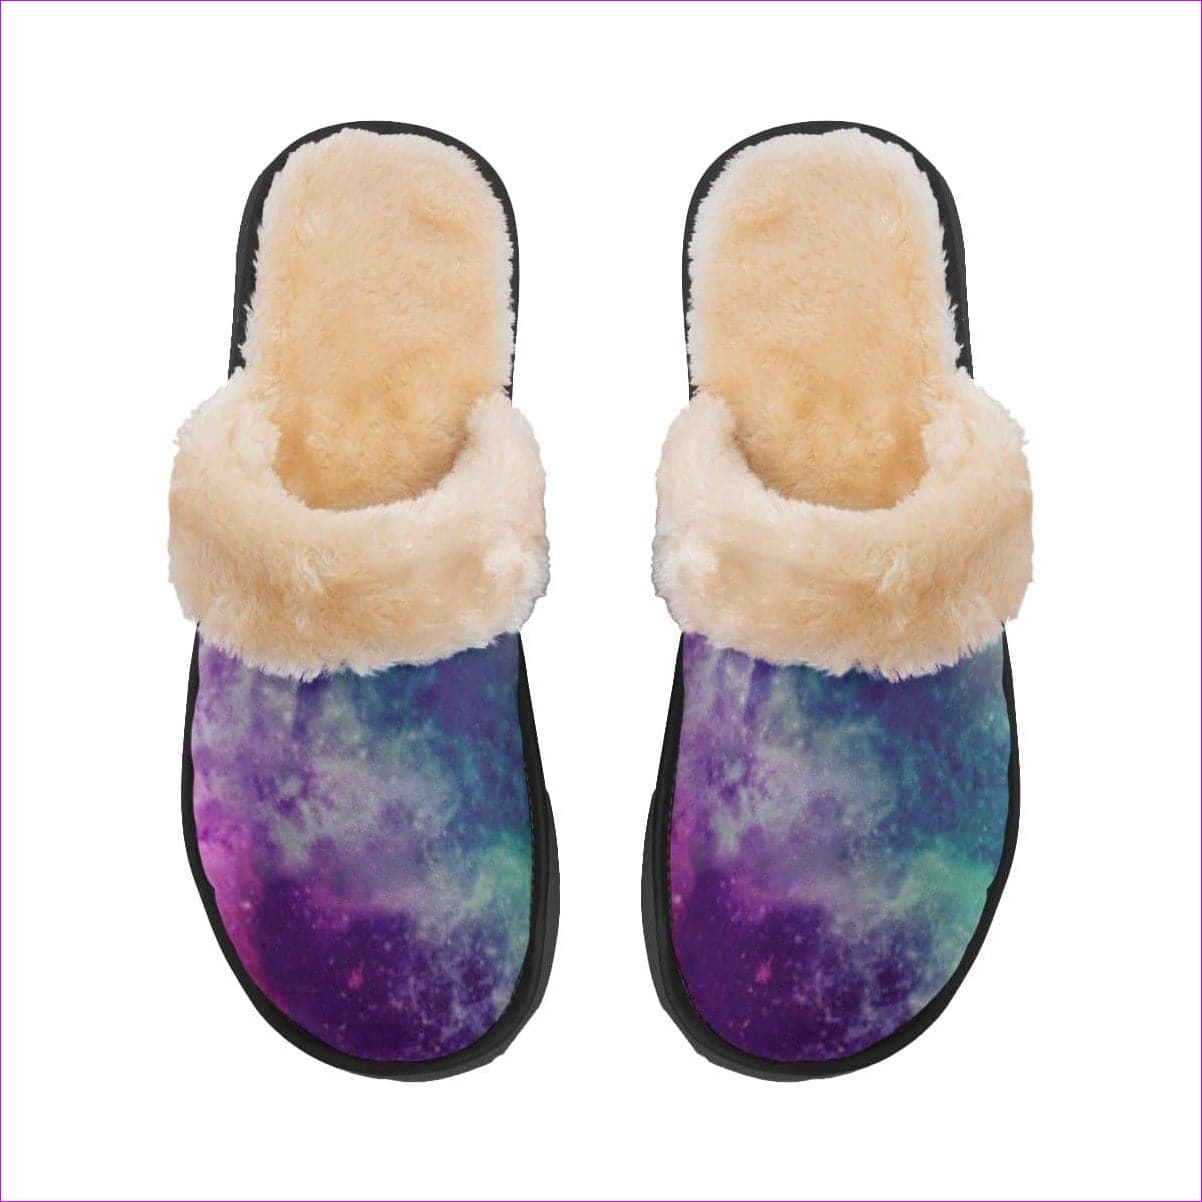 - Galaxy Kids Home Plush Slippers - kids slippers at TFC&H Co.